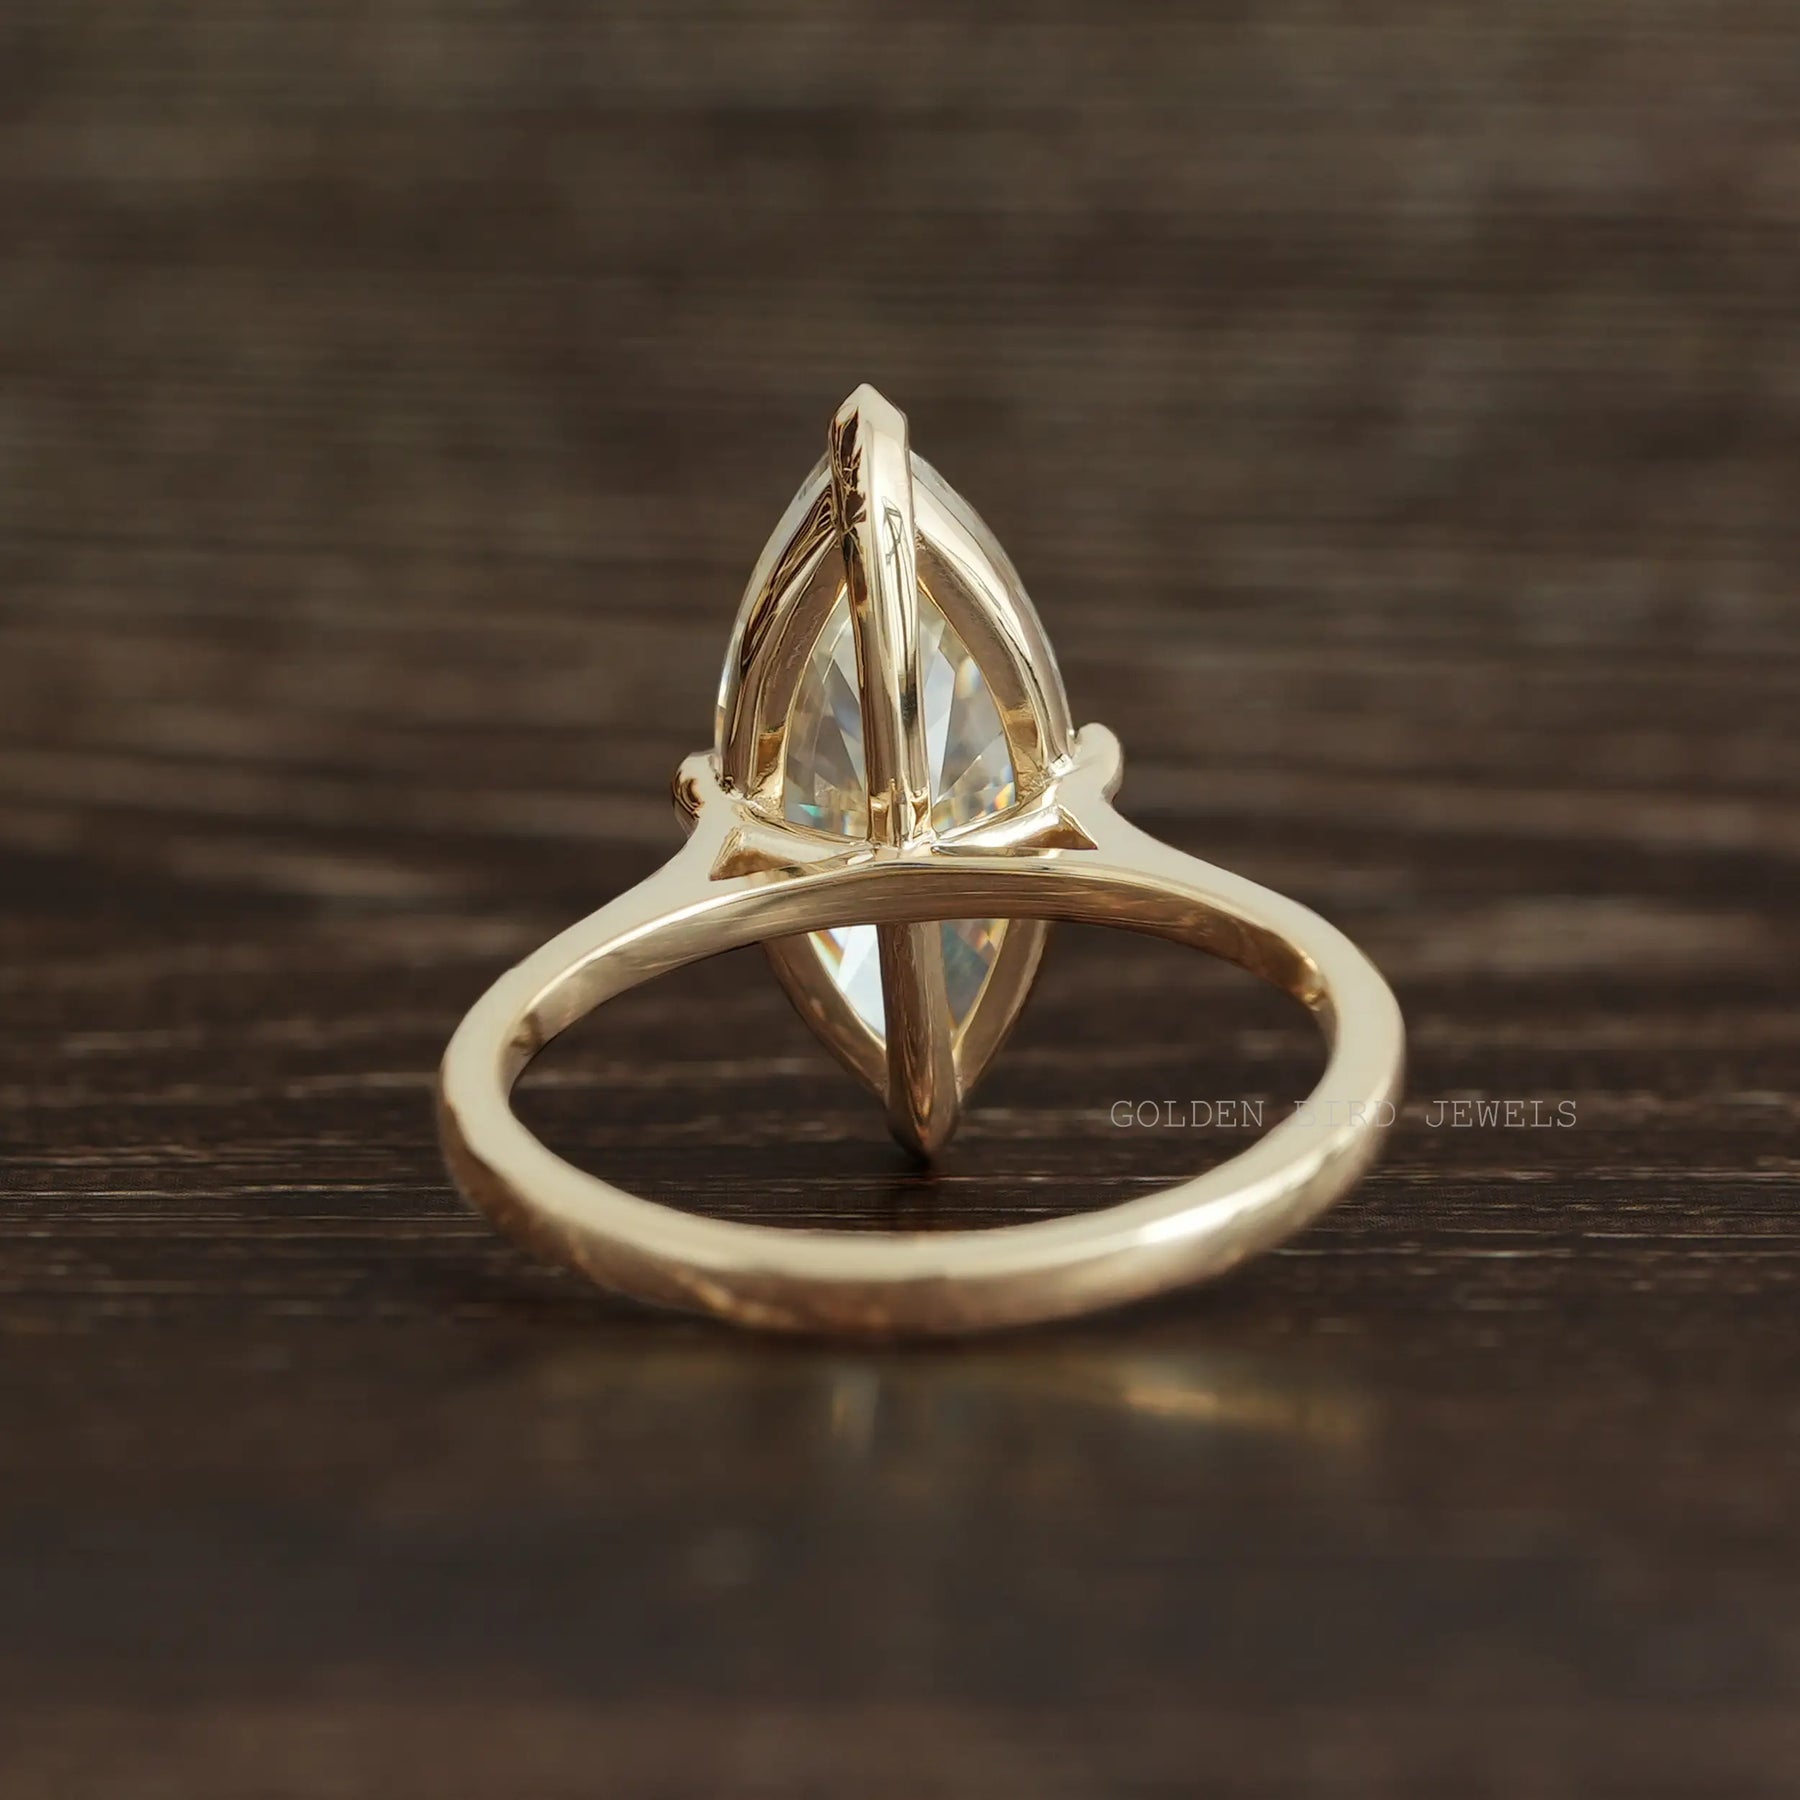 [Solitaire Marquise Cut Solitaire Engagement Ring In Prong Setting]-[Golden Bird Jewels]